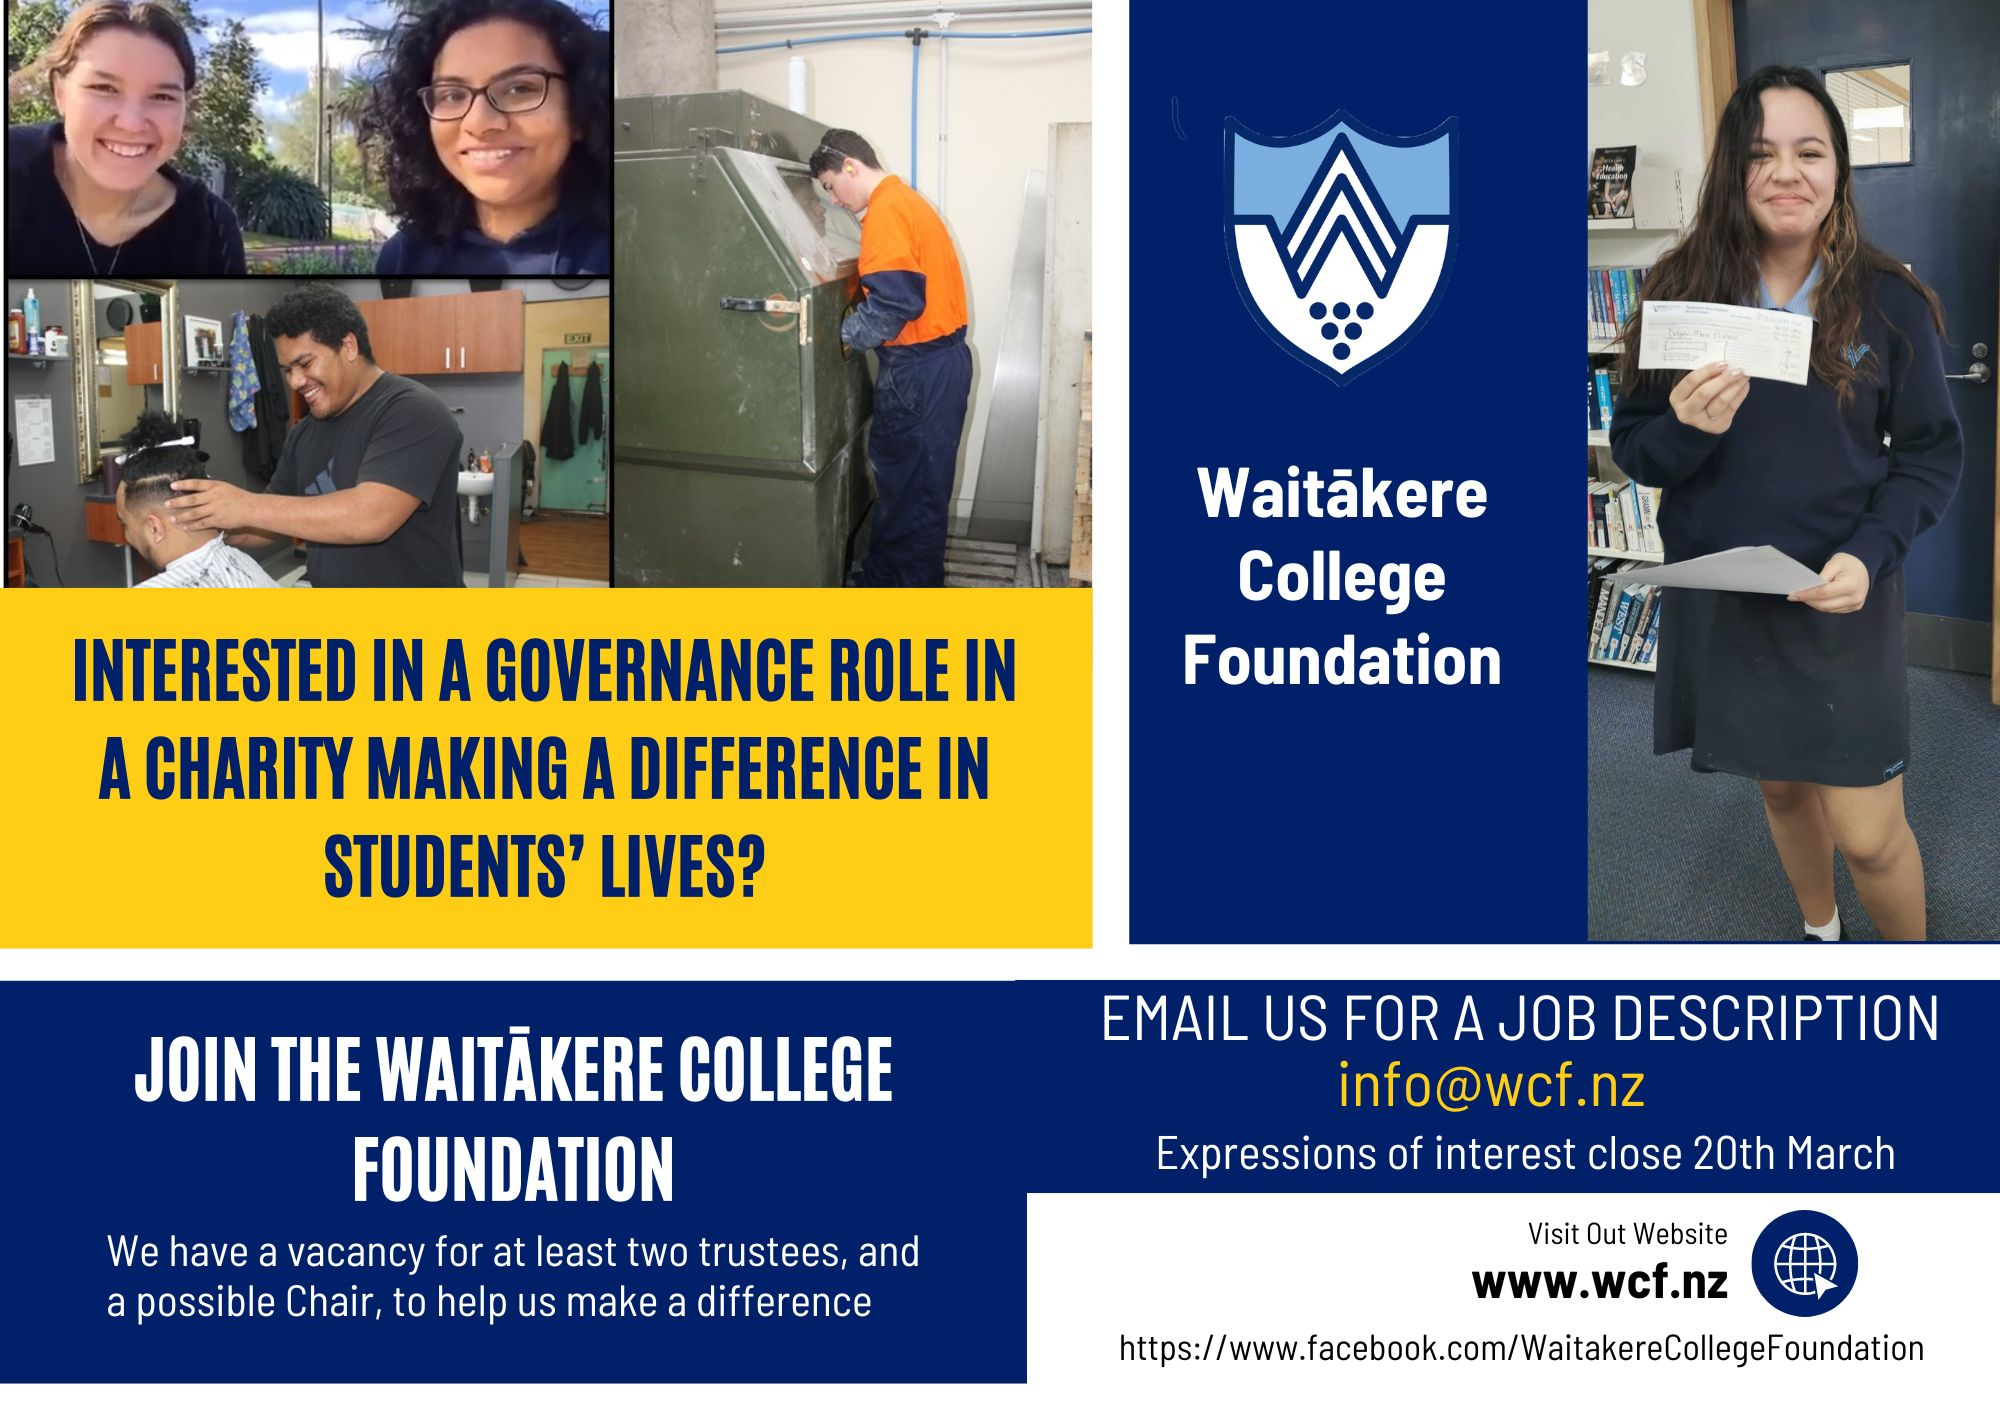 The Waitākere College Foundation is Looking for New Volunteer Trustees